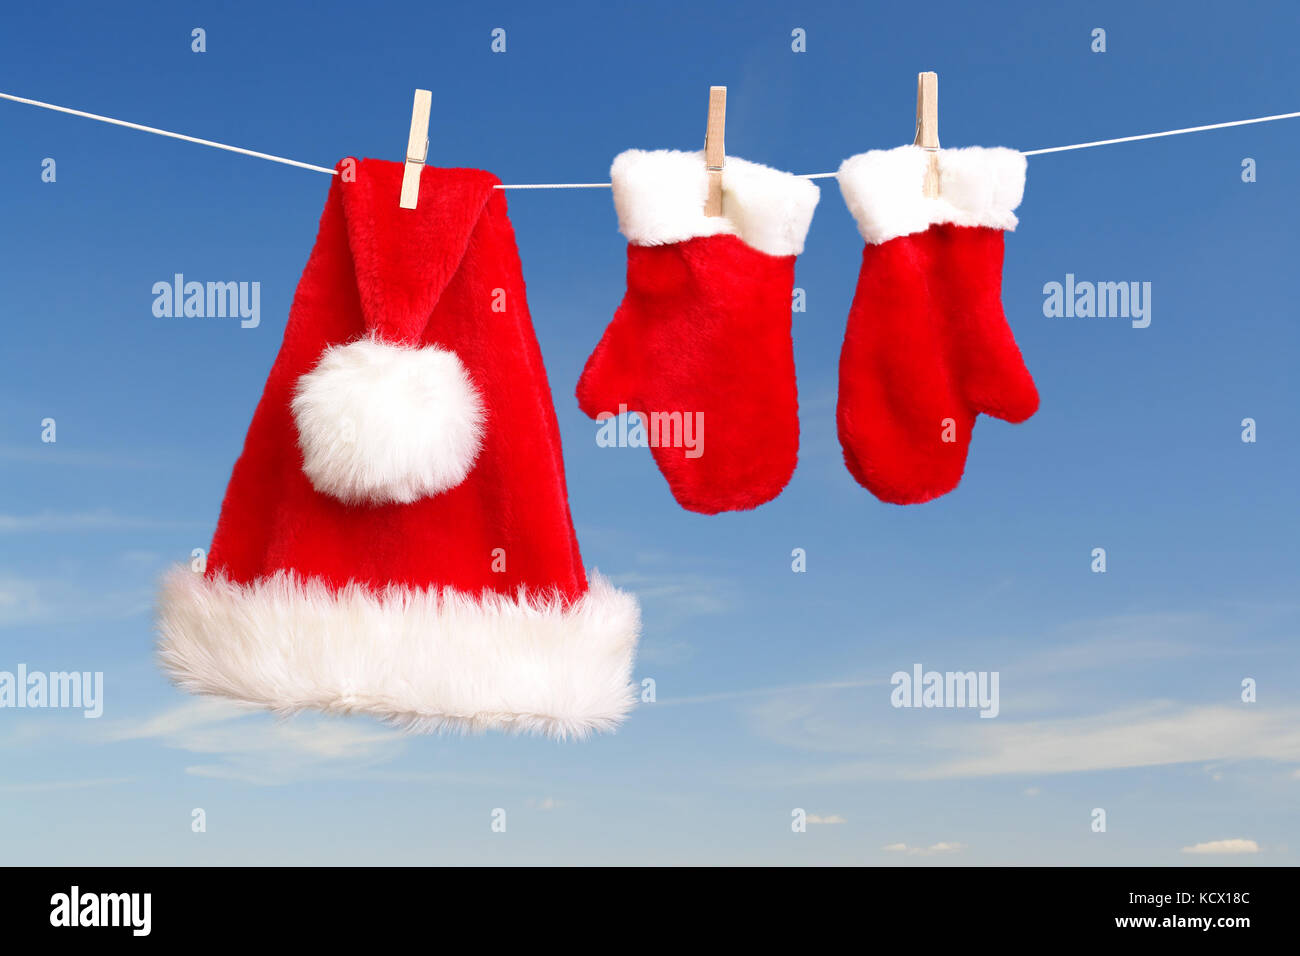 Red santa claus hat and pair of gloves drying in the open air hanging on clothes line affixed with wooden pegs Stock Photo